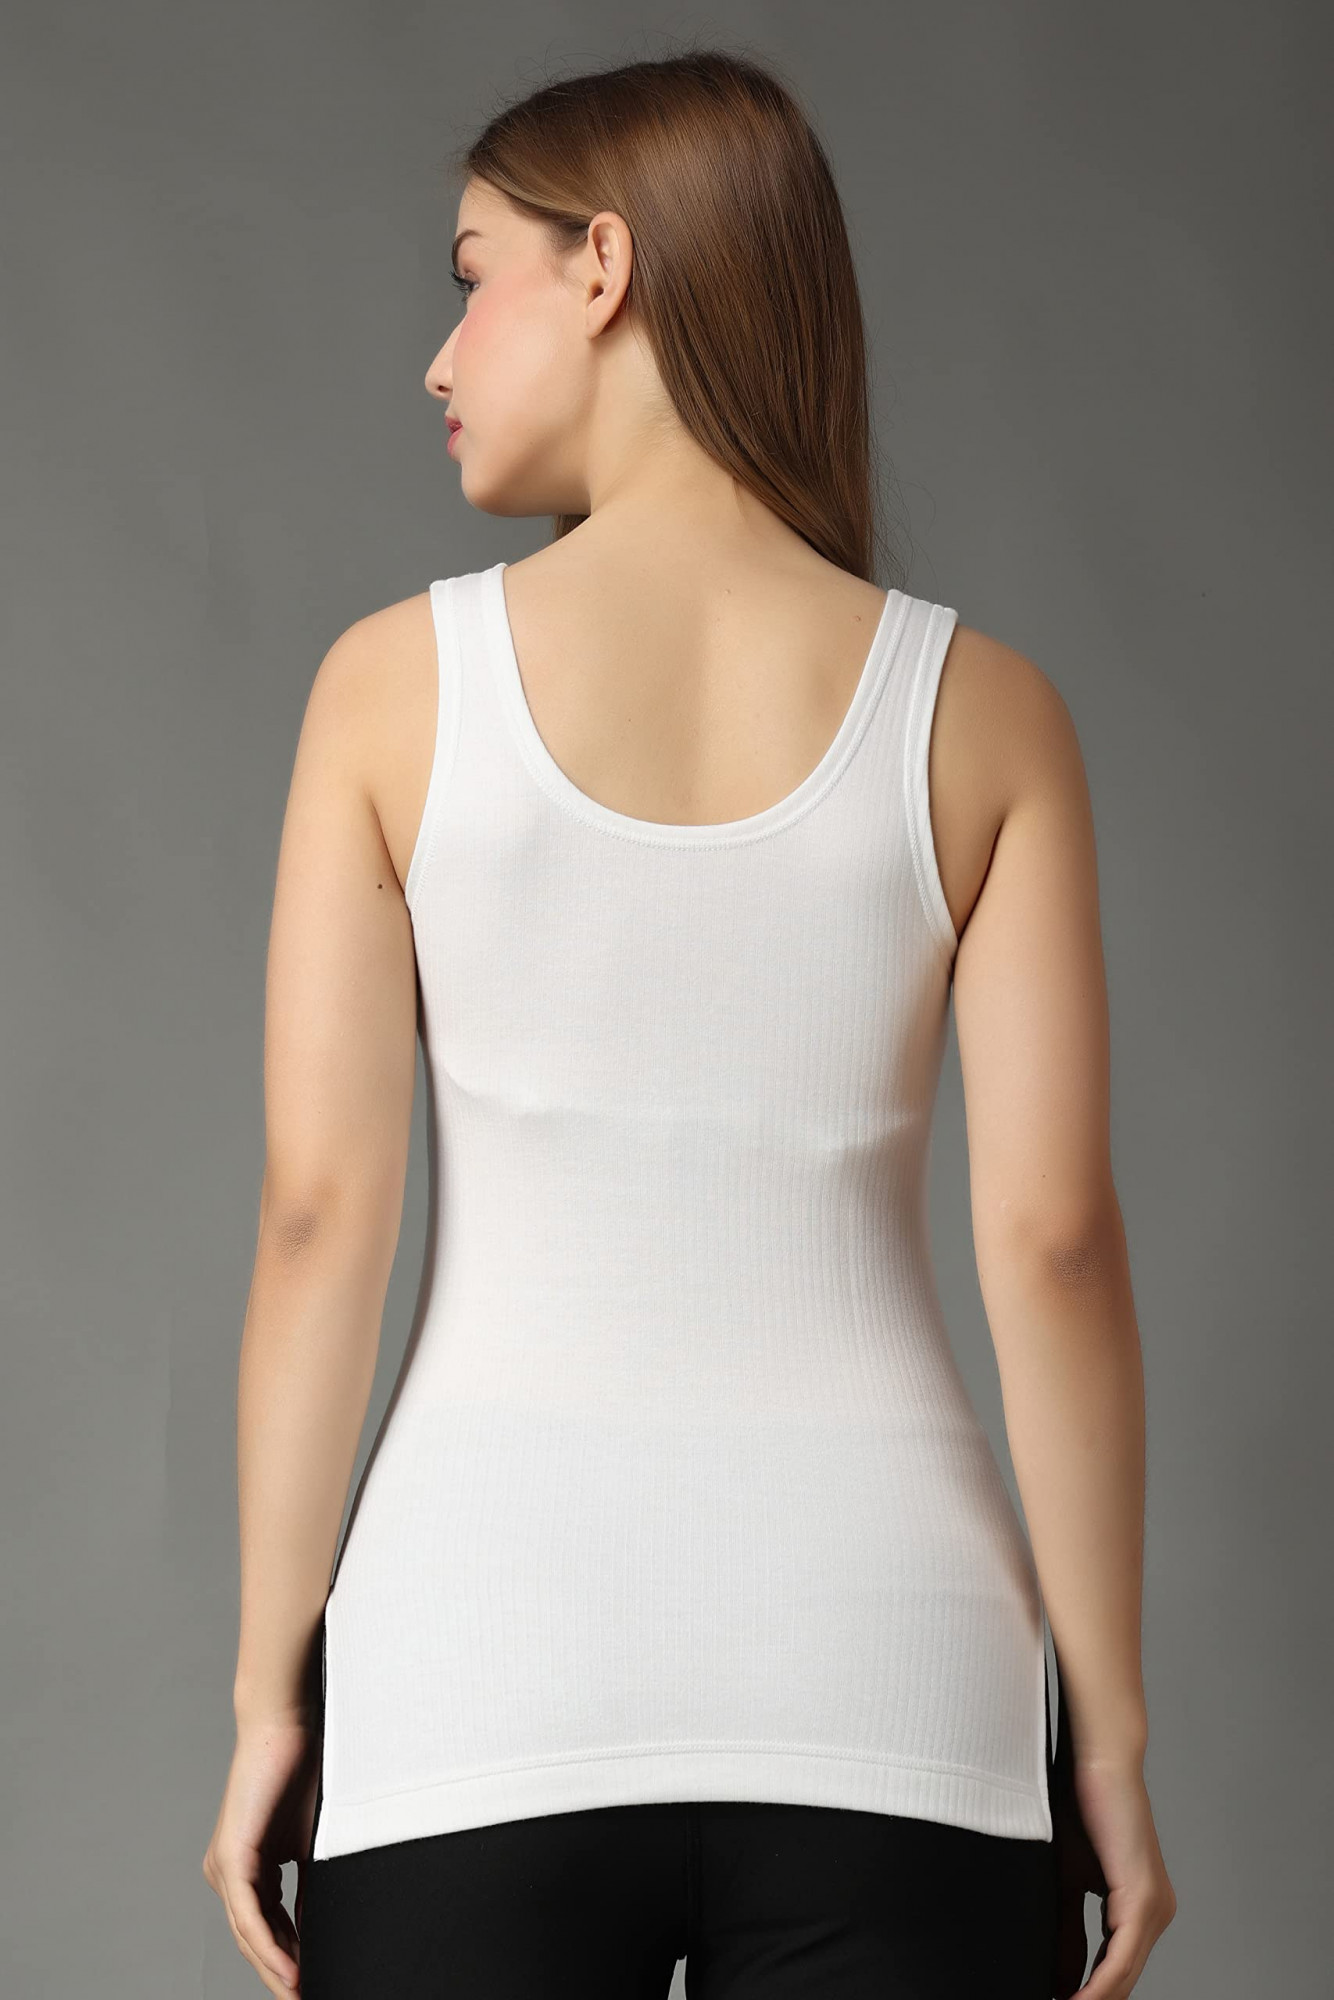 Buy Wearslim® Premium Cotton Quilted Thermal Scoop Neck Camisole